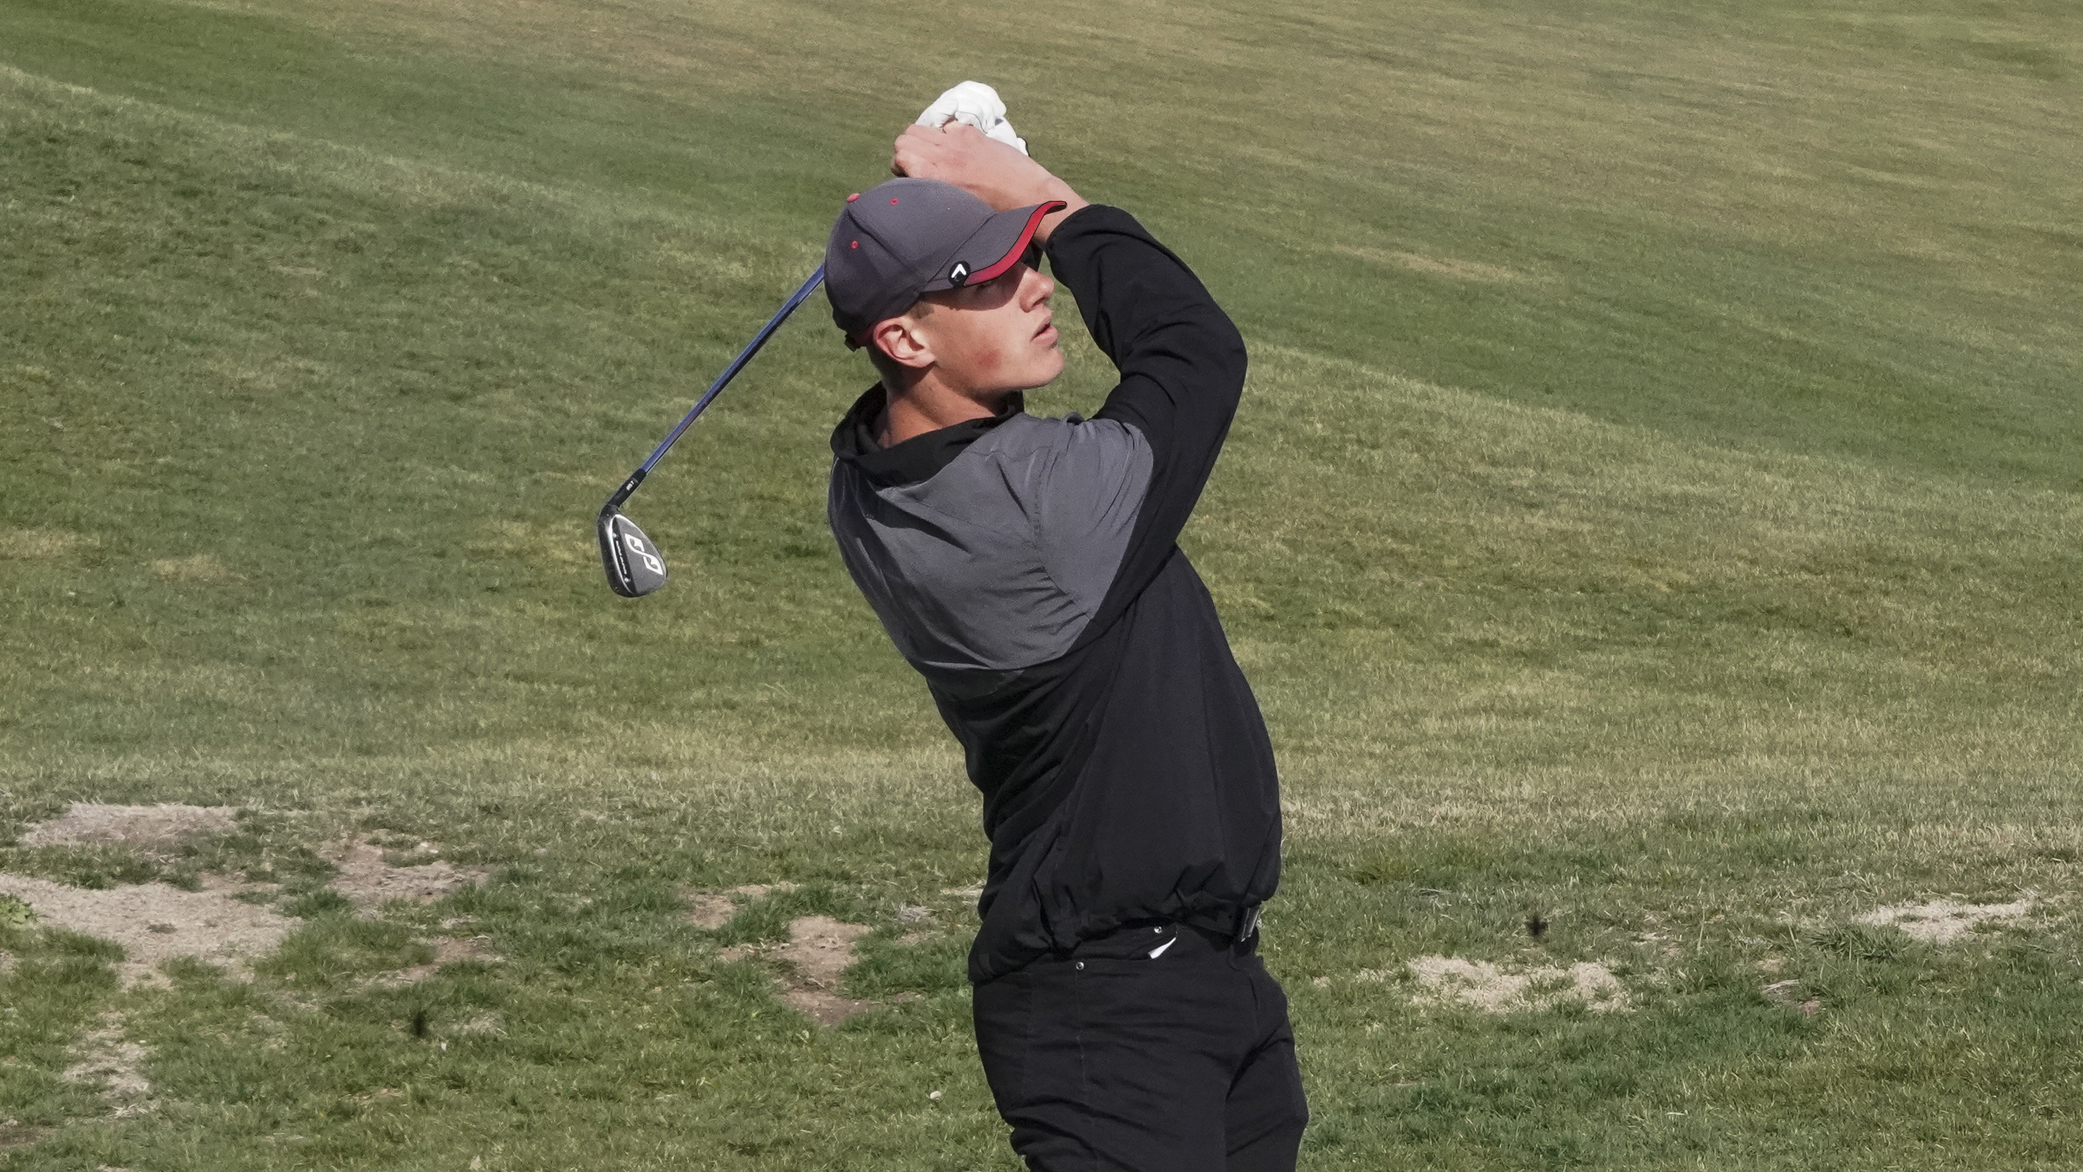 Jones leads Knights at McCook Community College Tournament